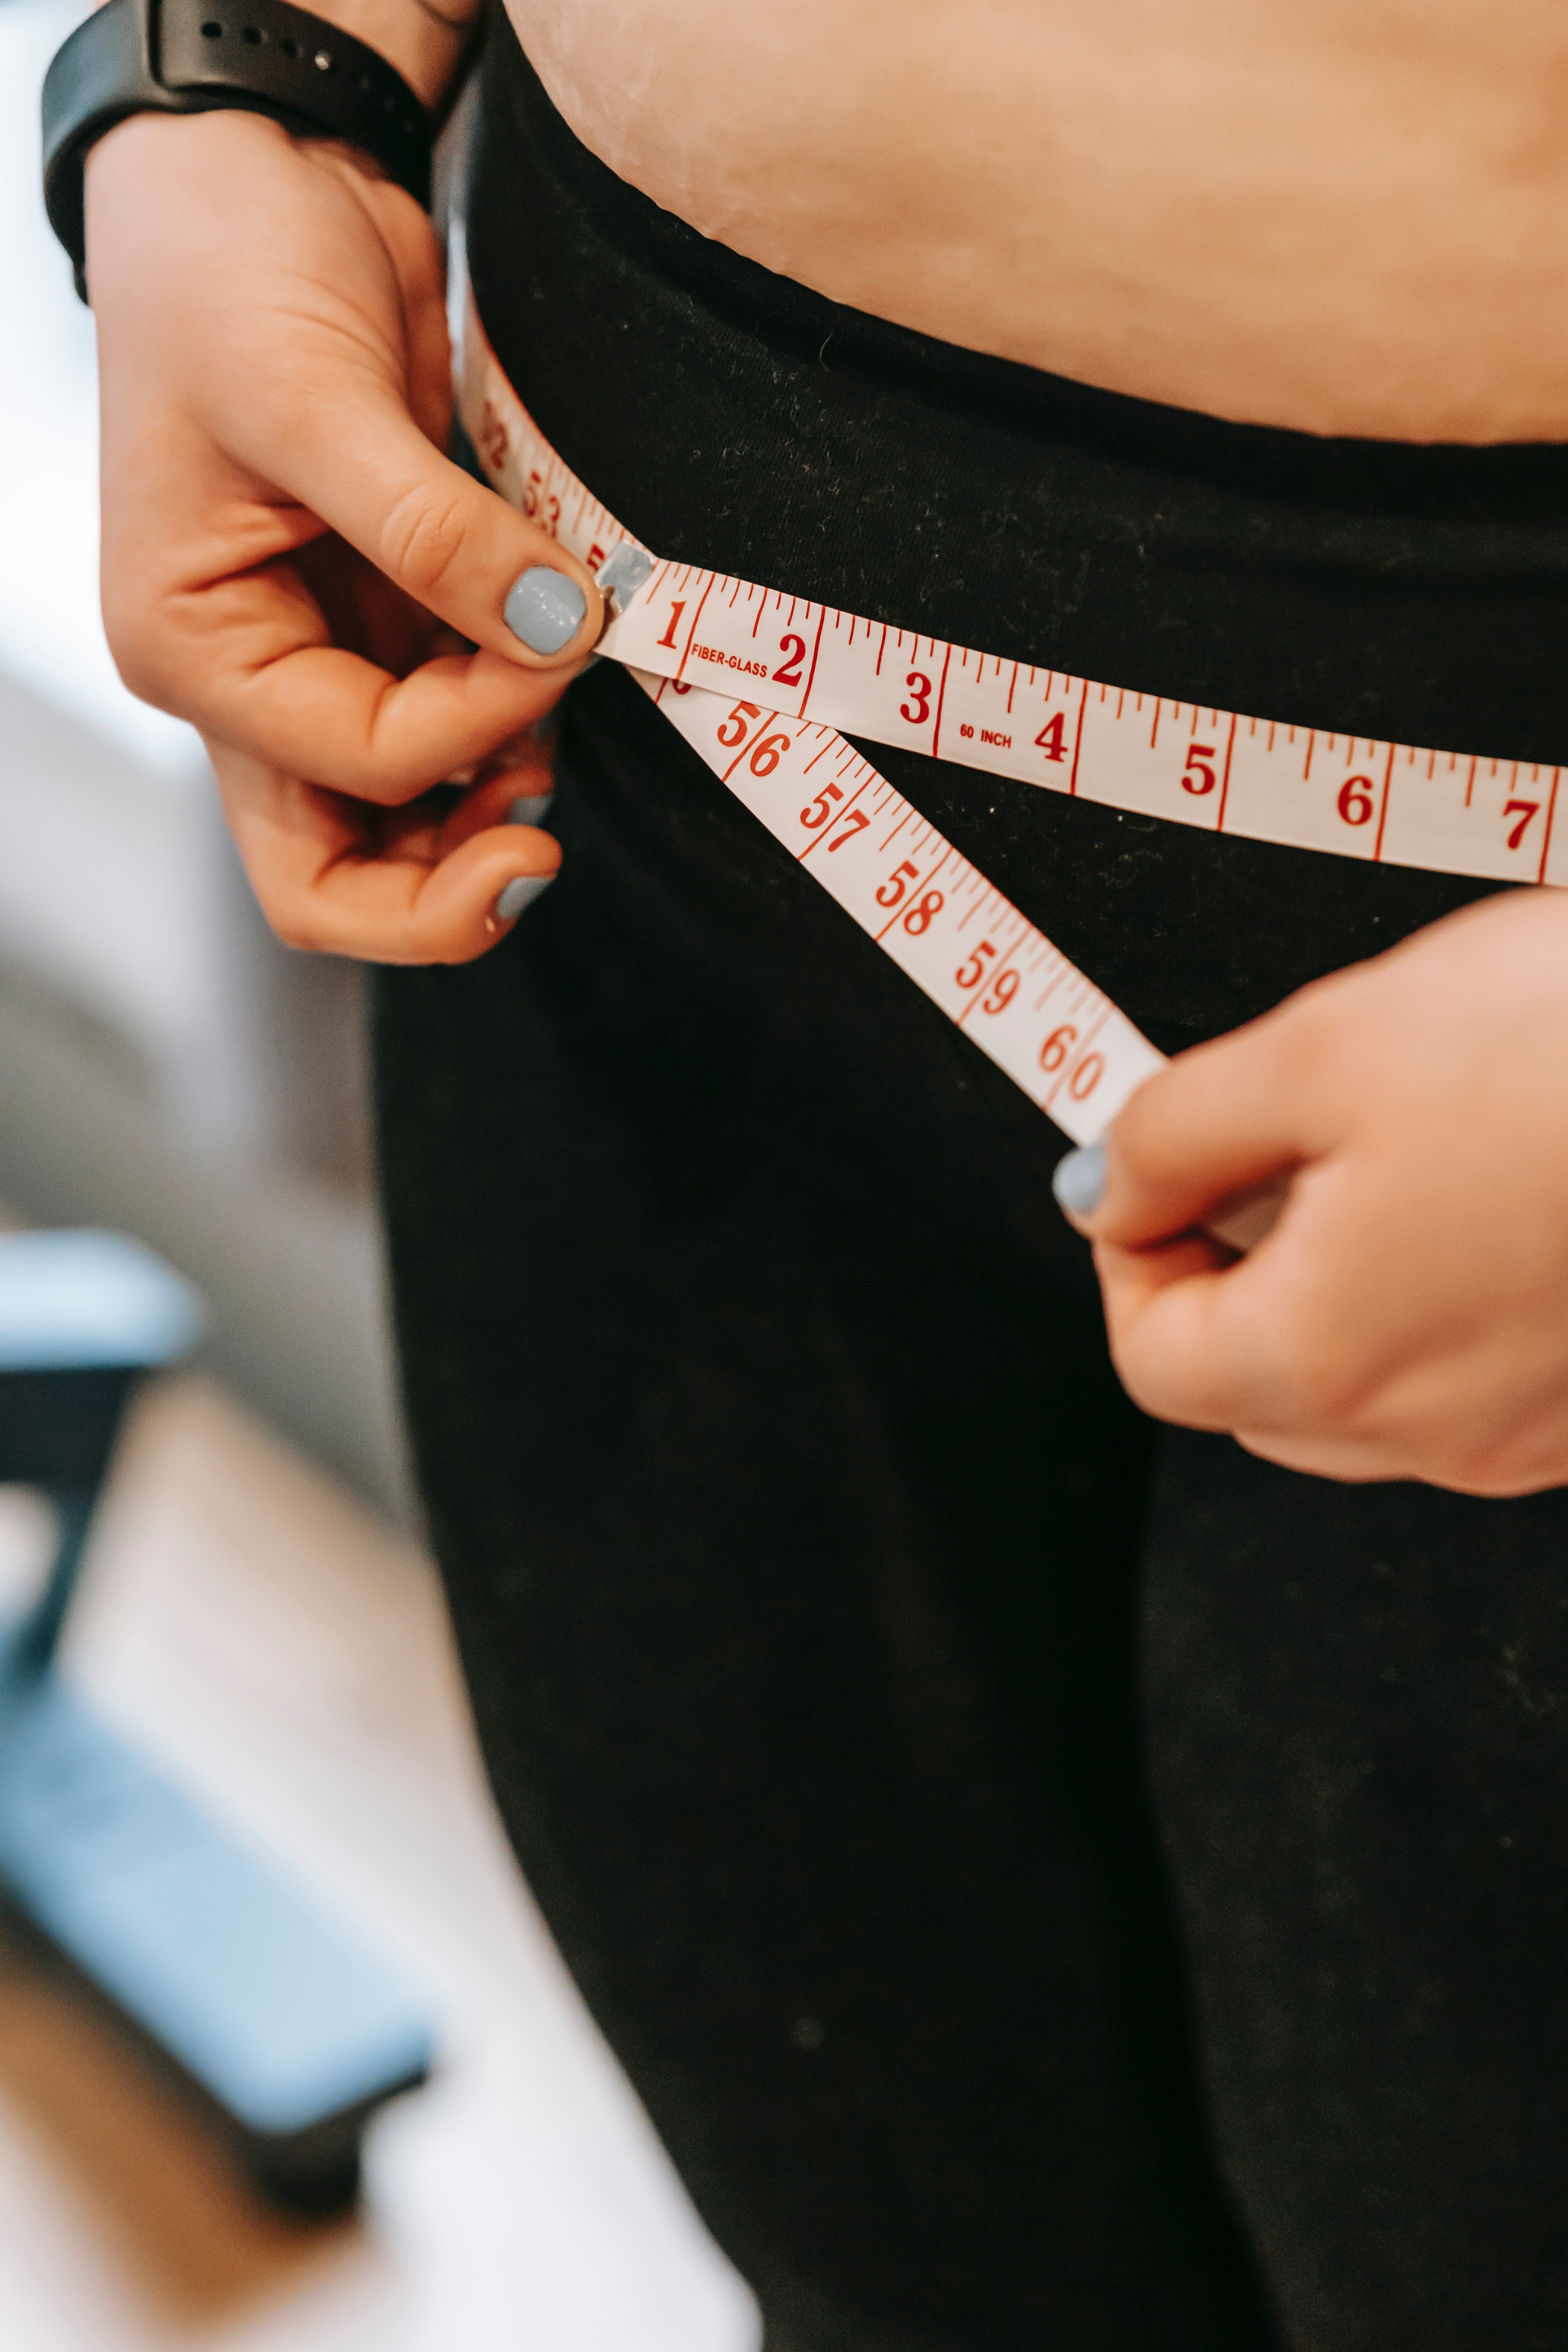 A person taking their body measurements. | Source: Pexels